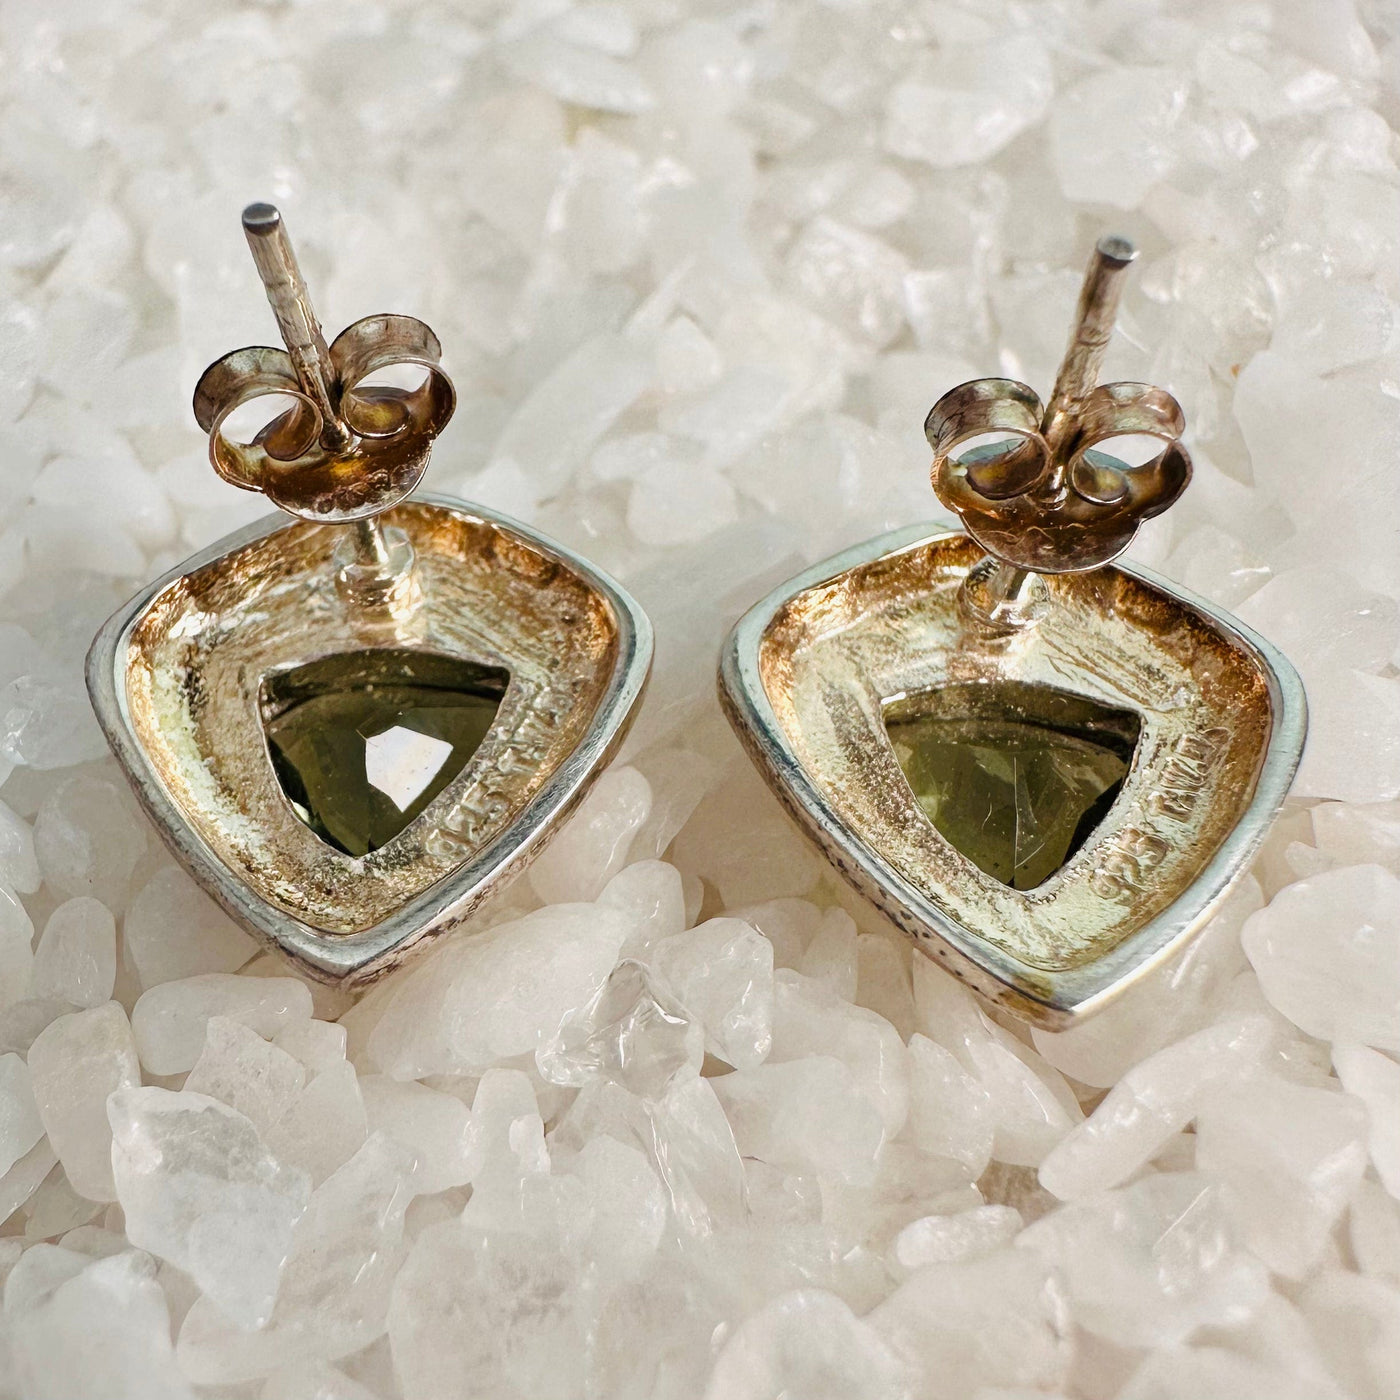 Up close view of the backs of both Moldavite earrings.